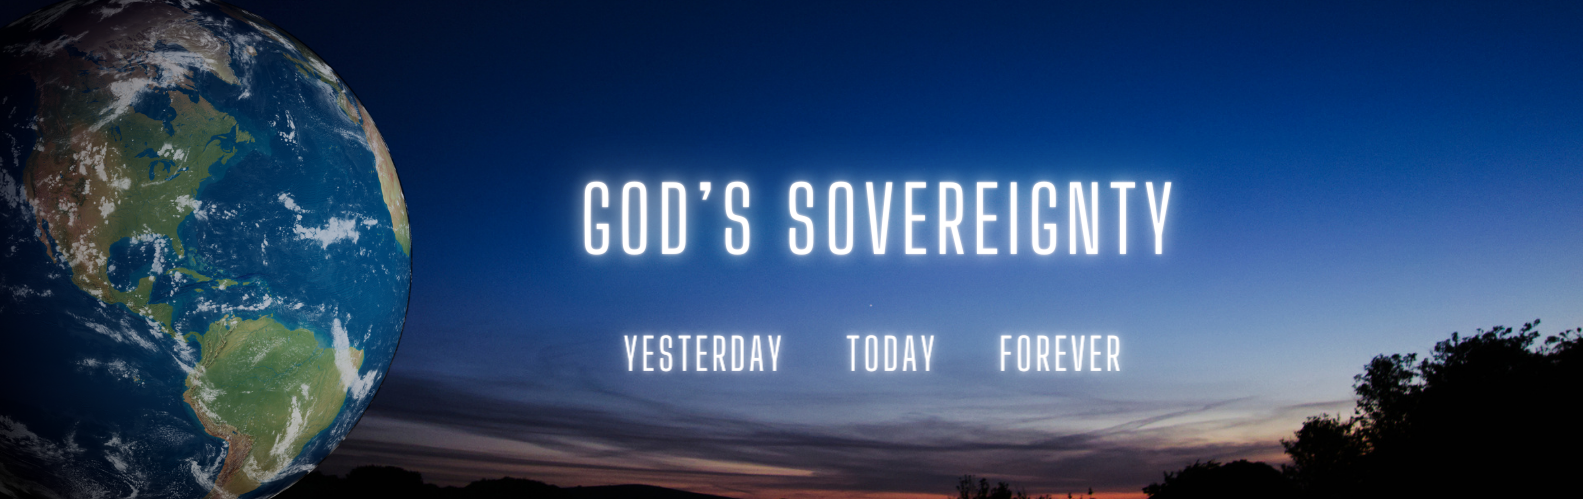 God’s Sovereignty is Our End Times Lifeline